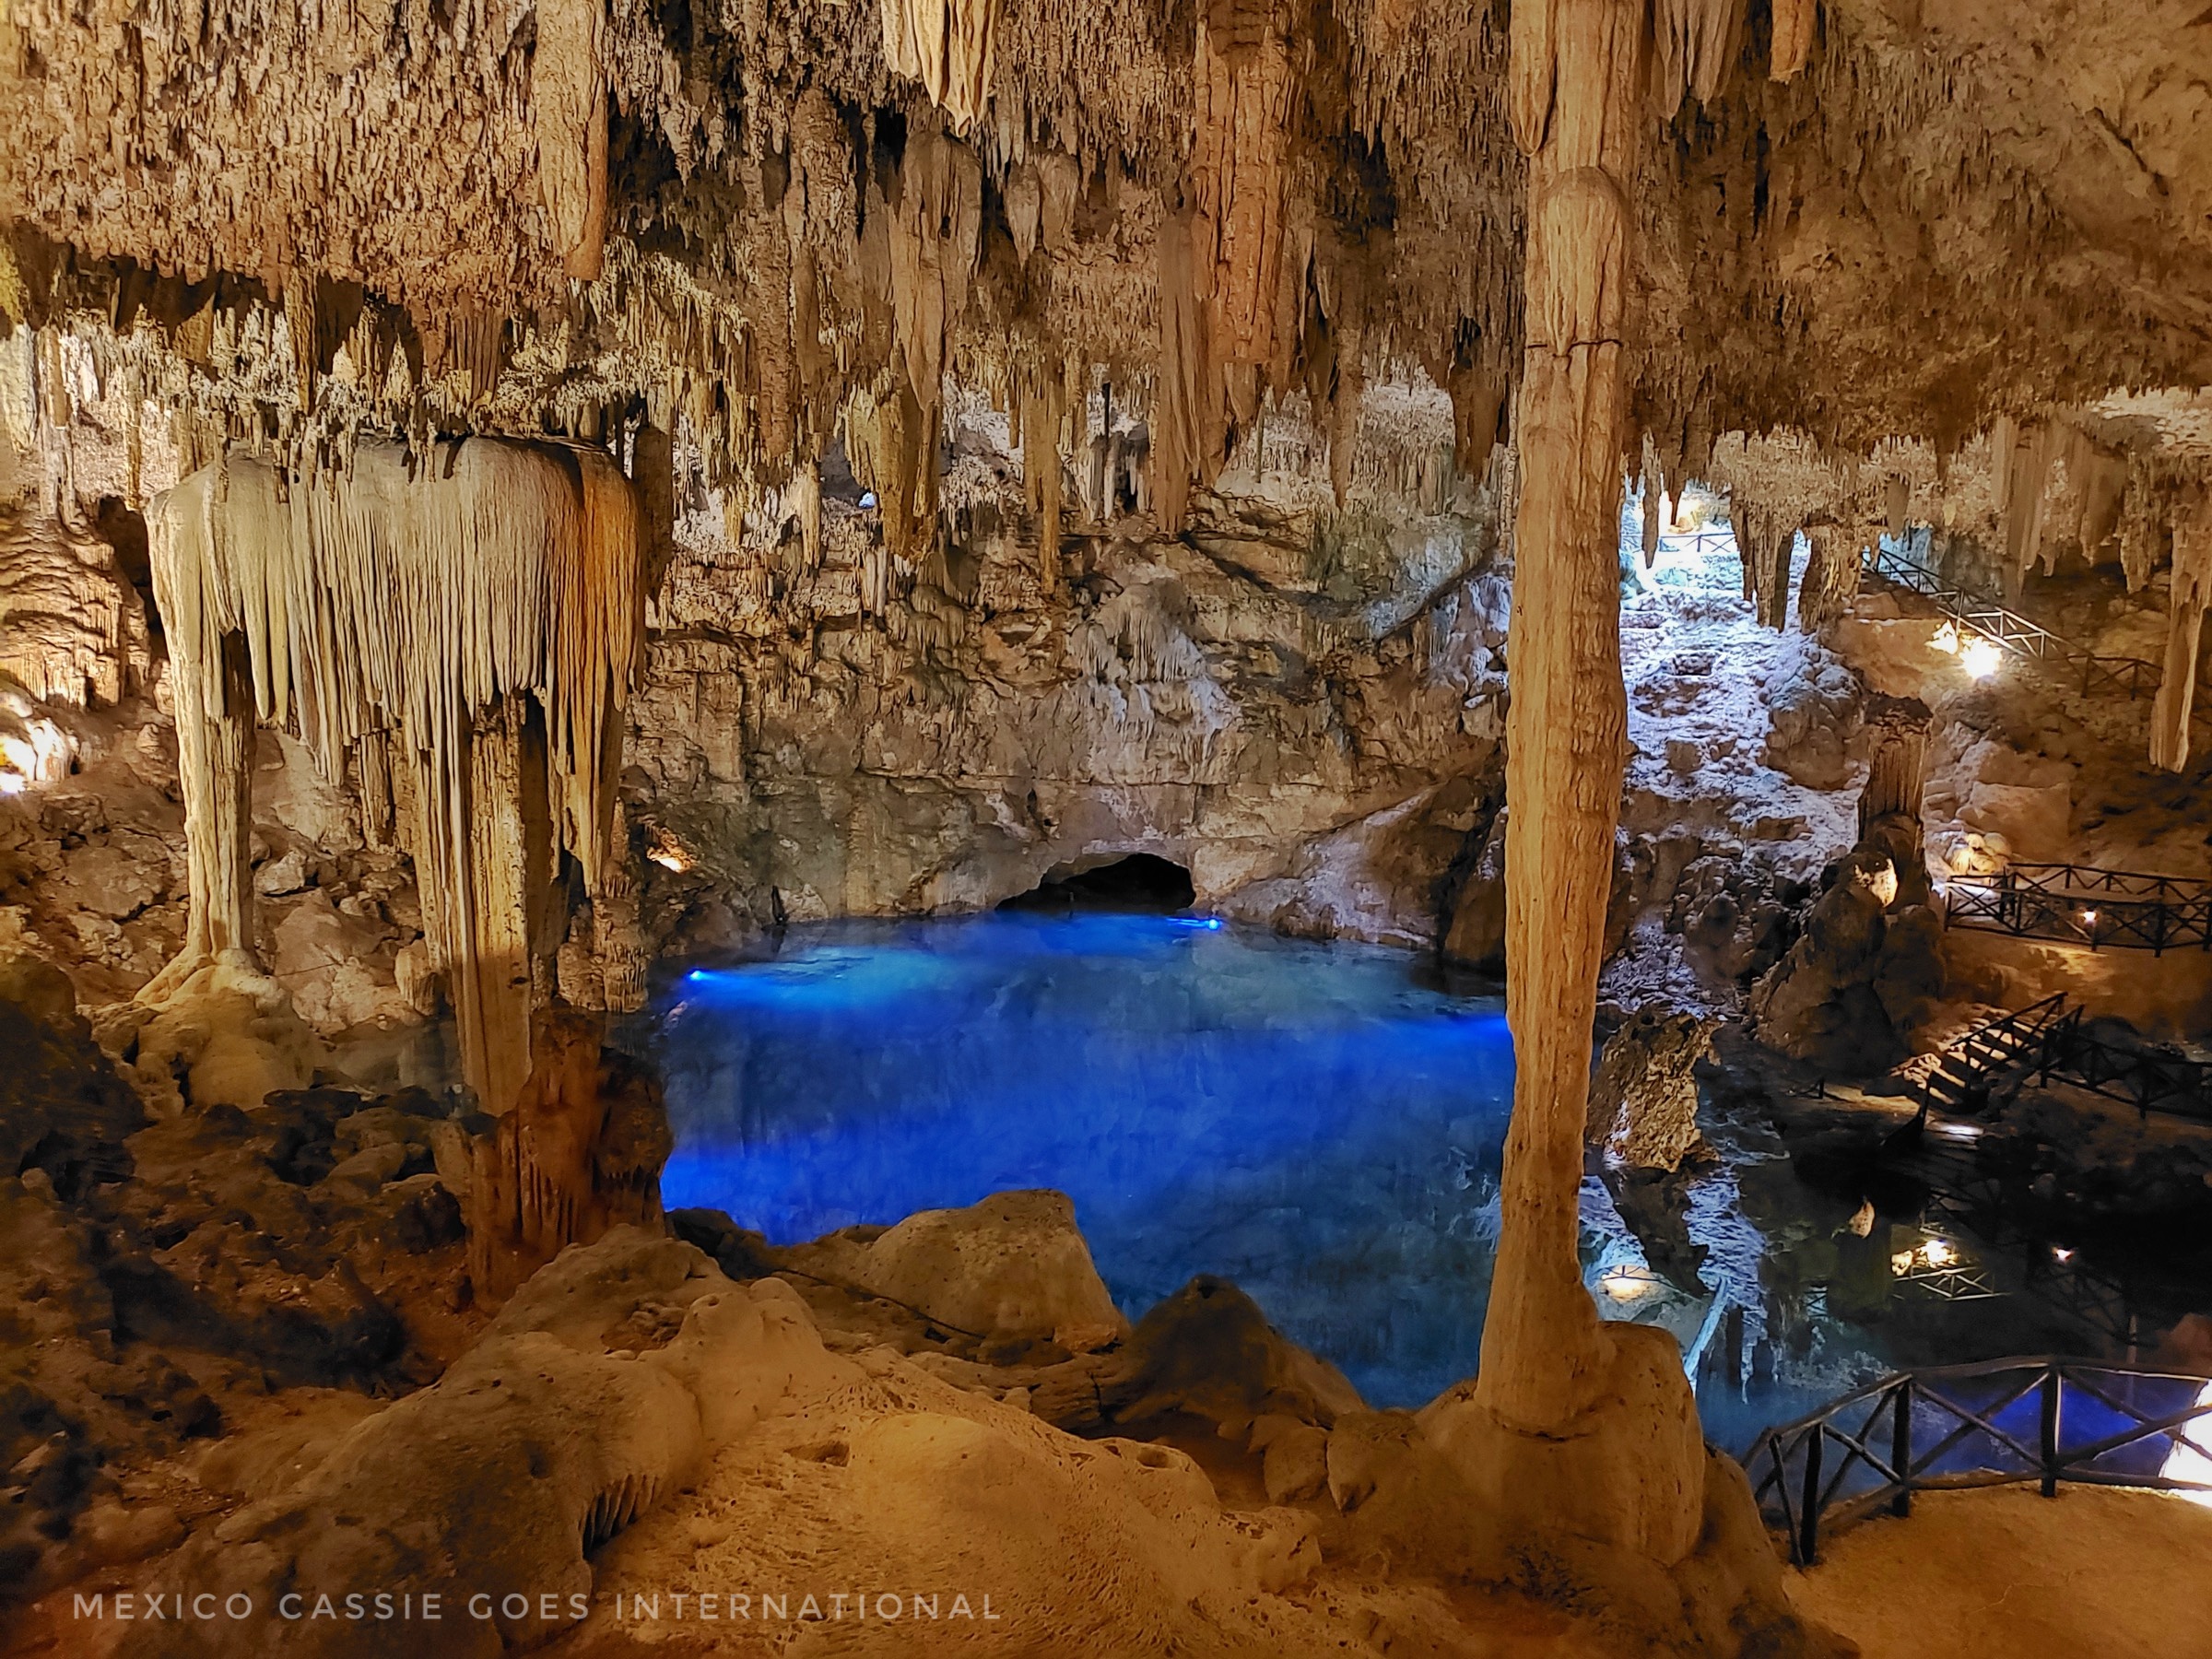 bright blue water at bottom of cave. cave is full of stalactites and stalagmites